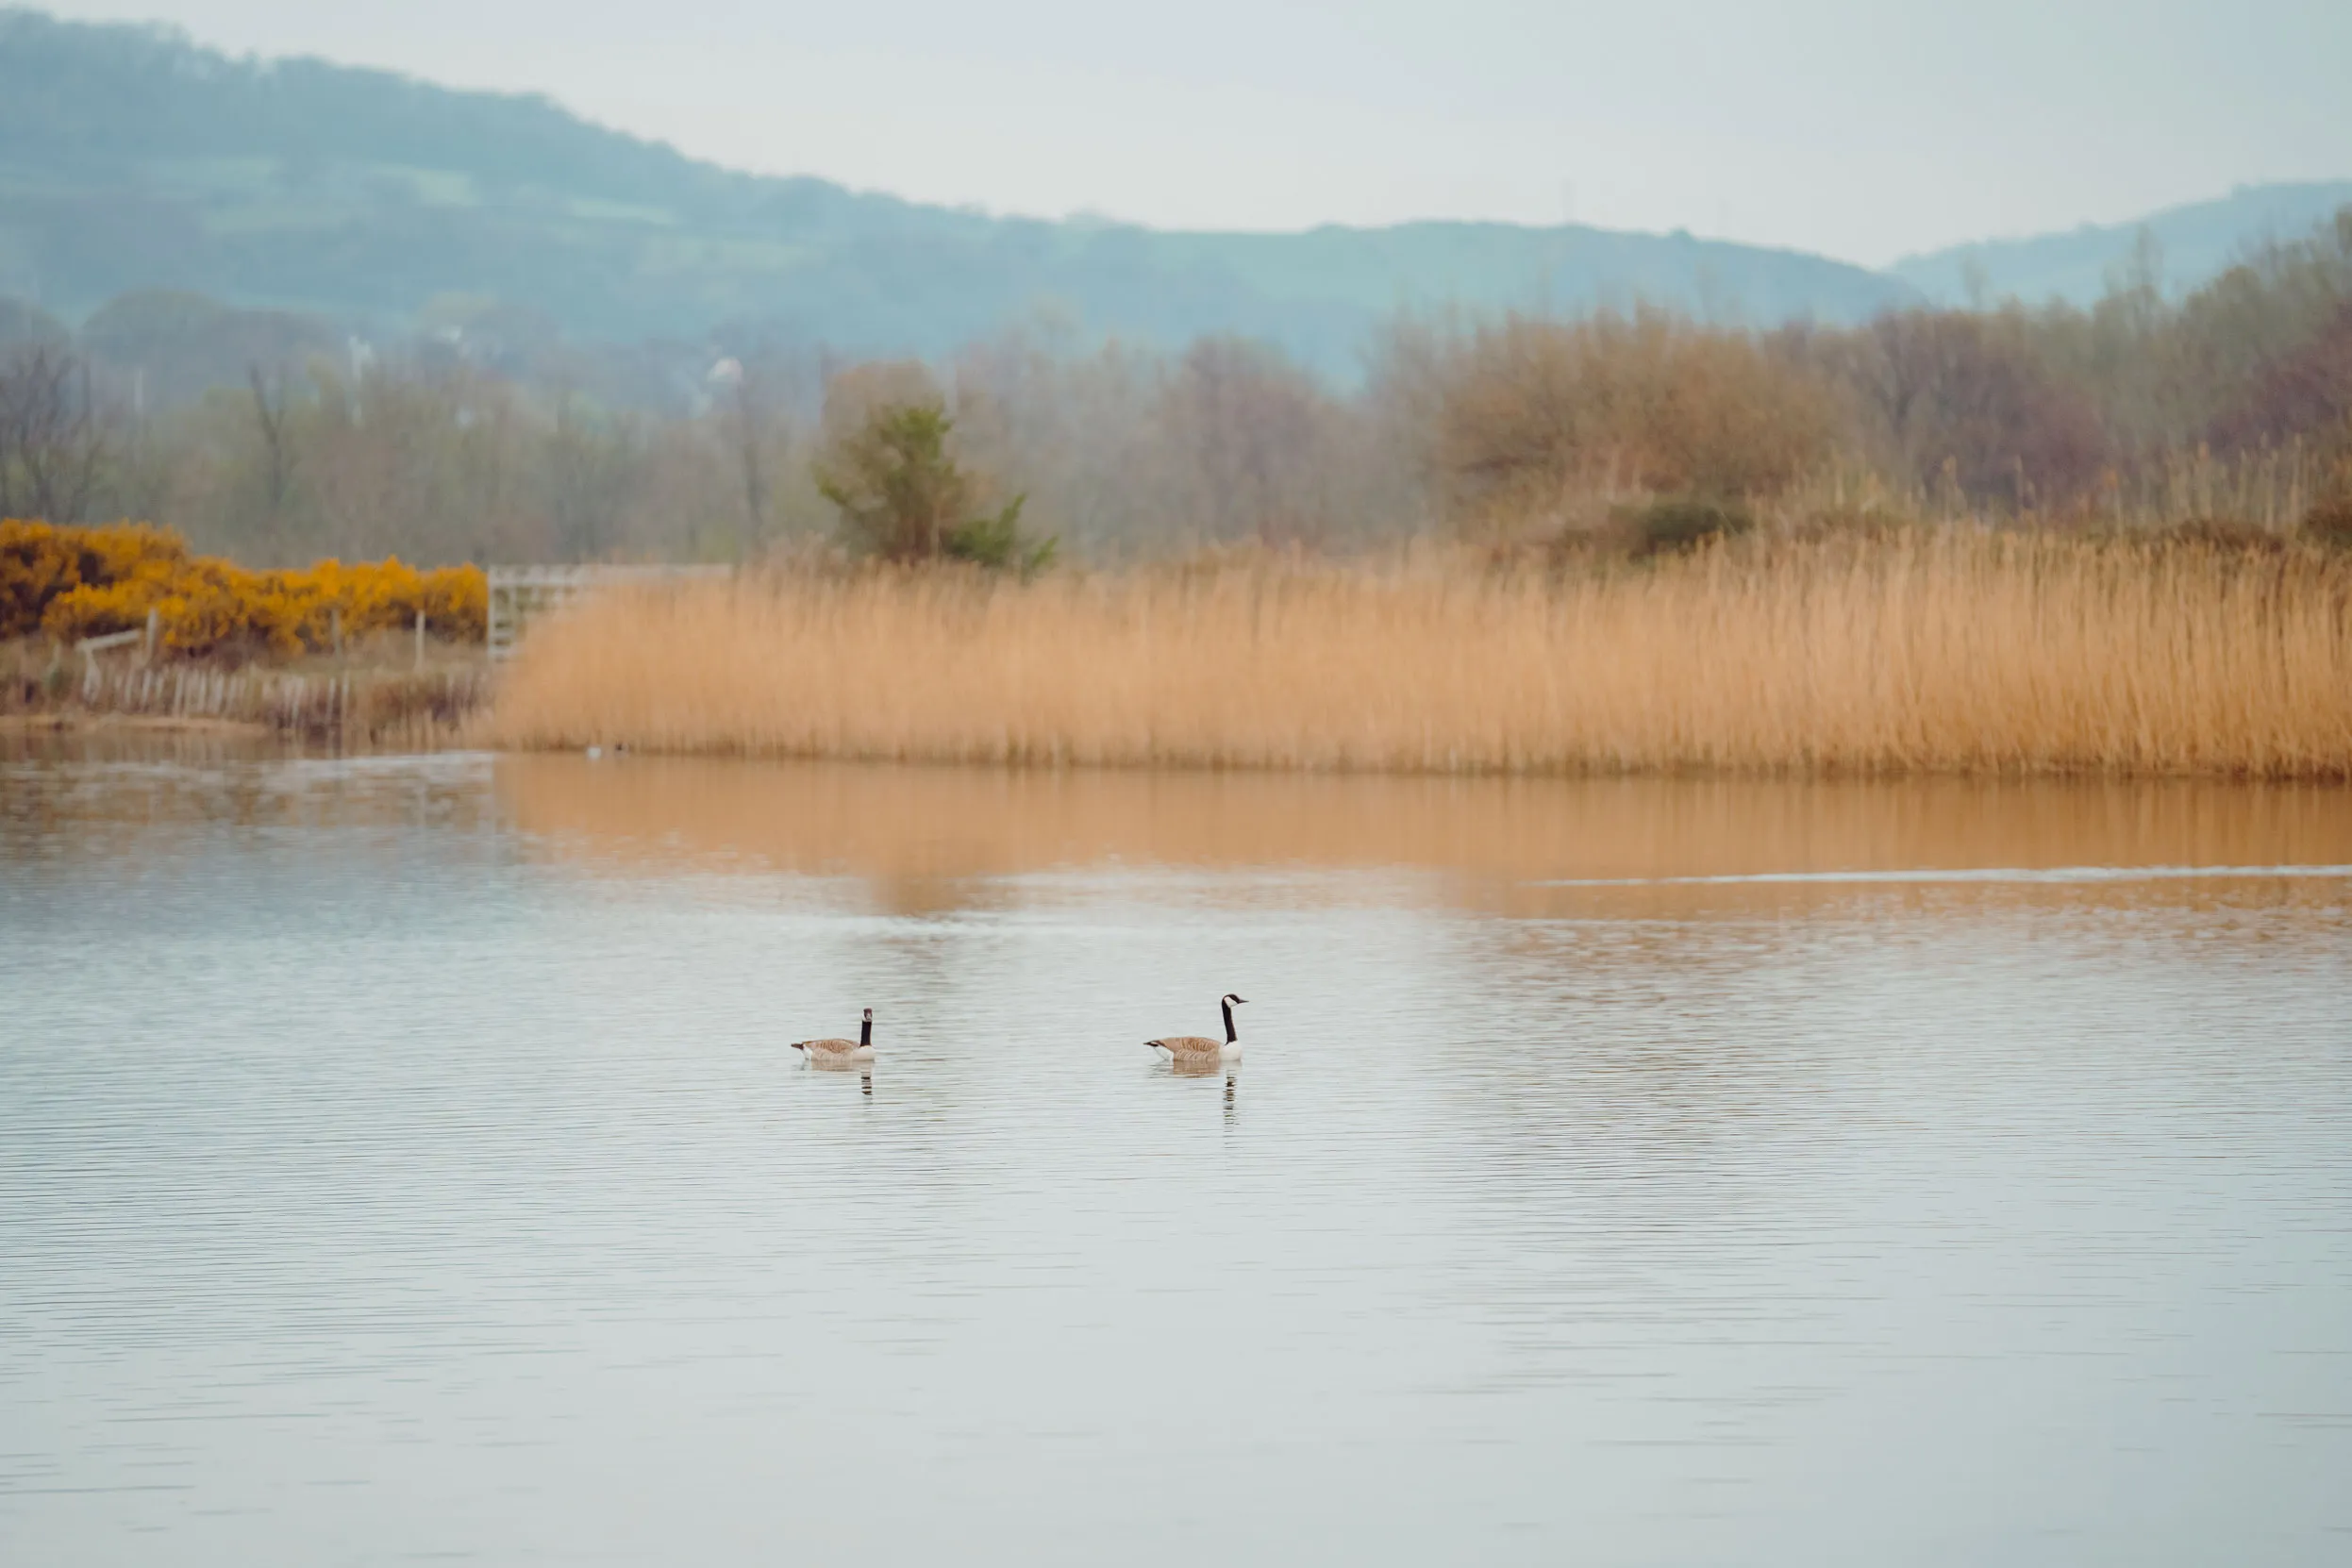 Two Canada Geese floating on a lake, lined with reed beds.